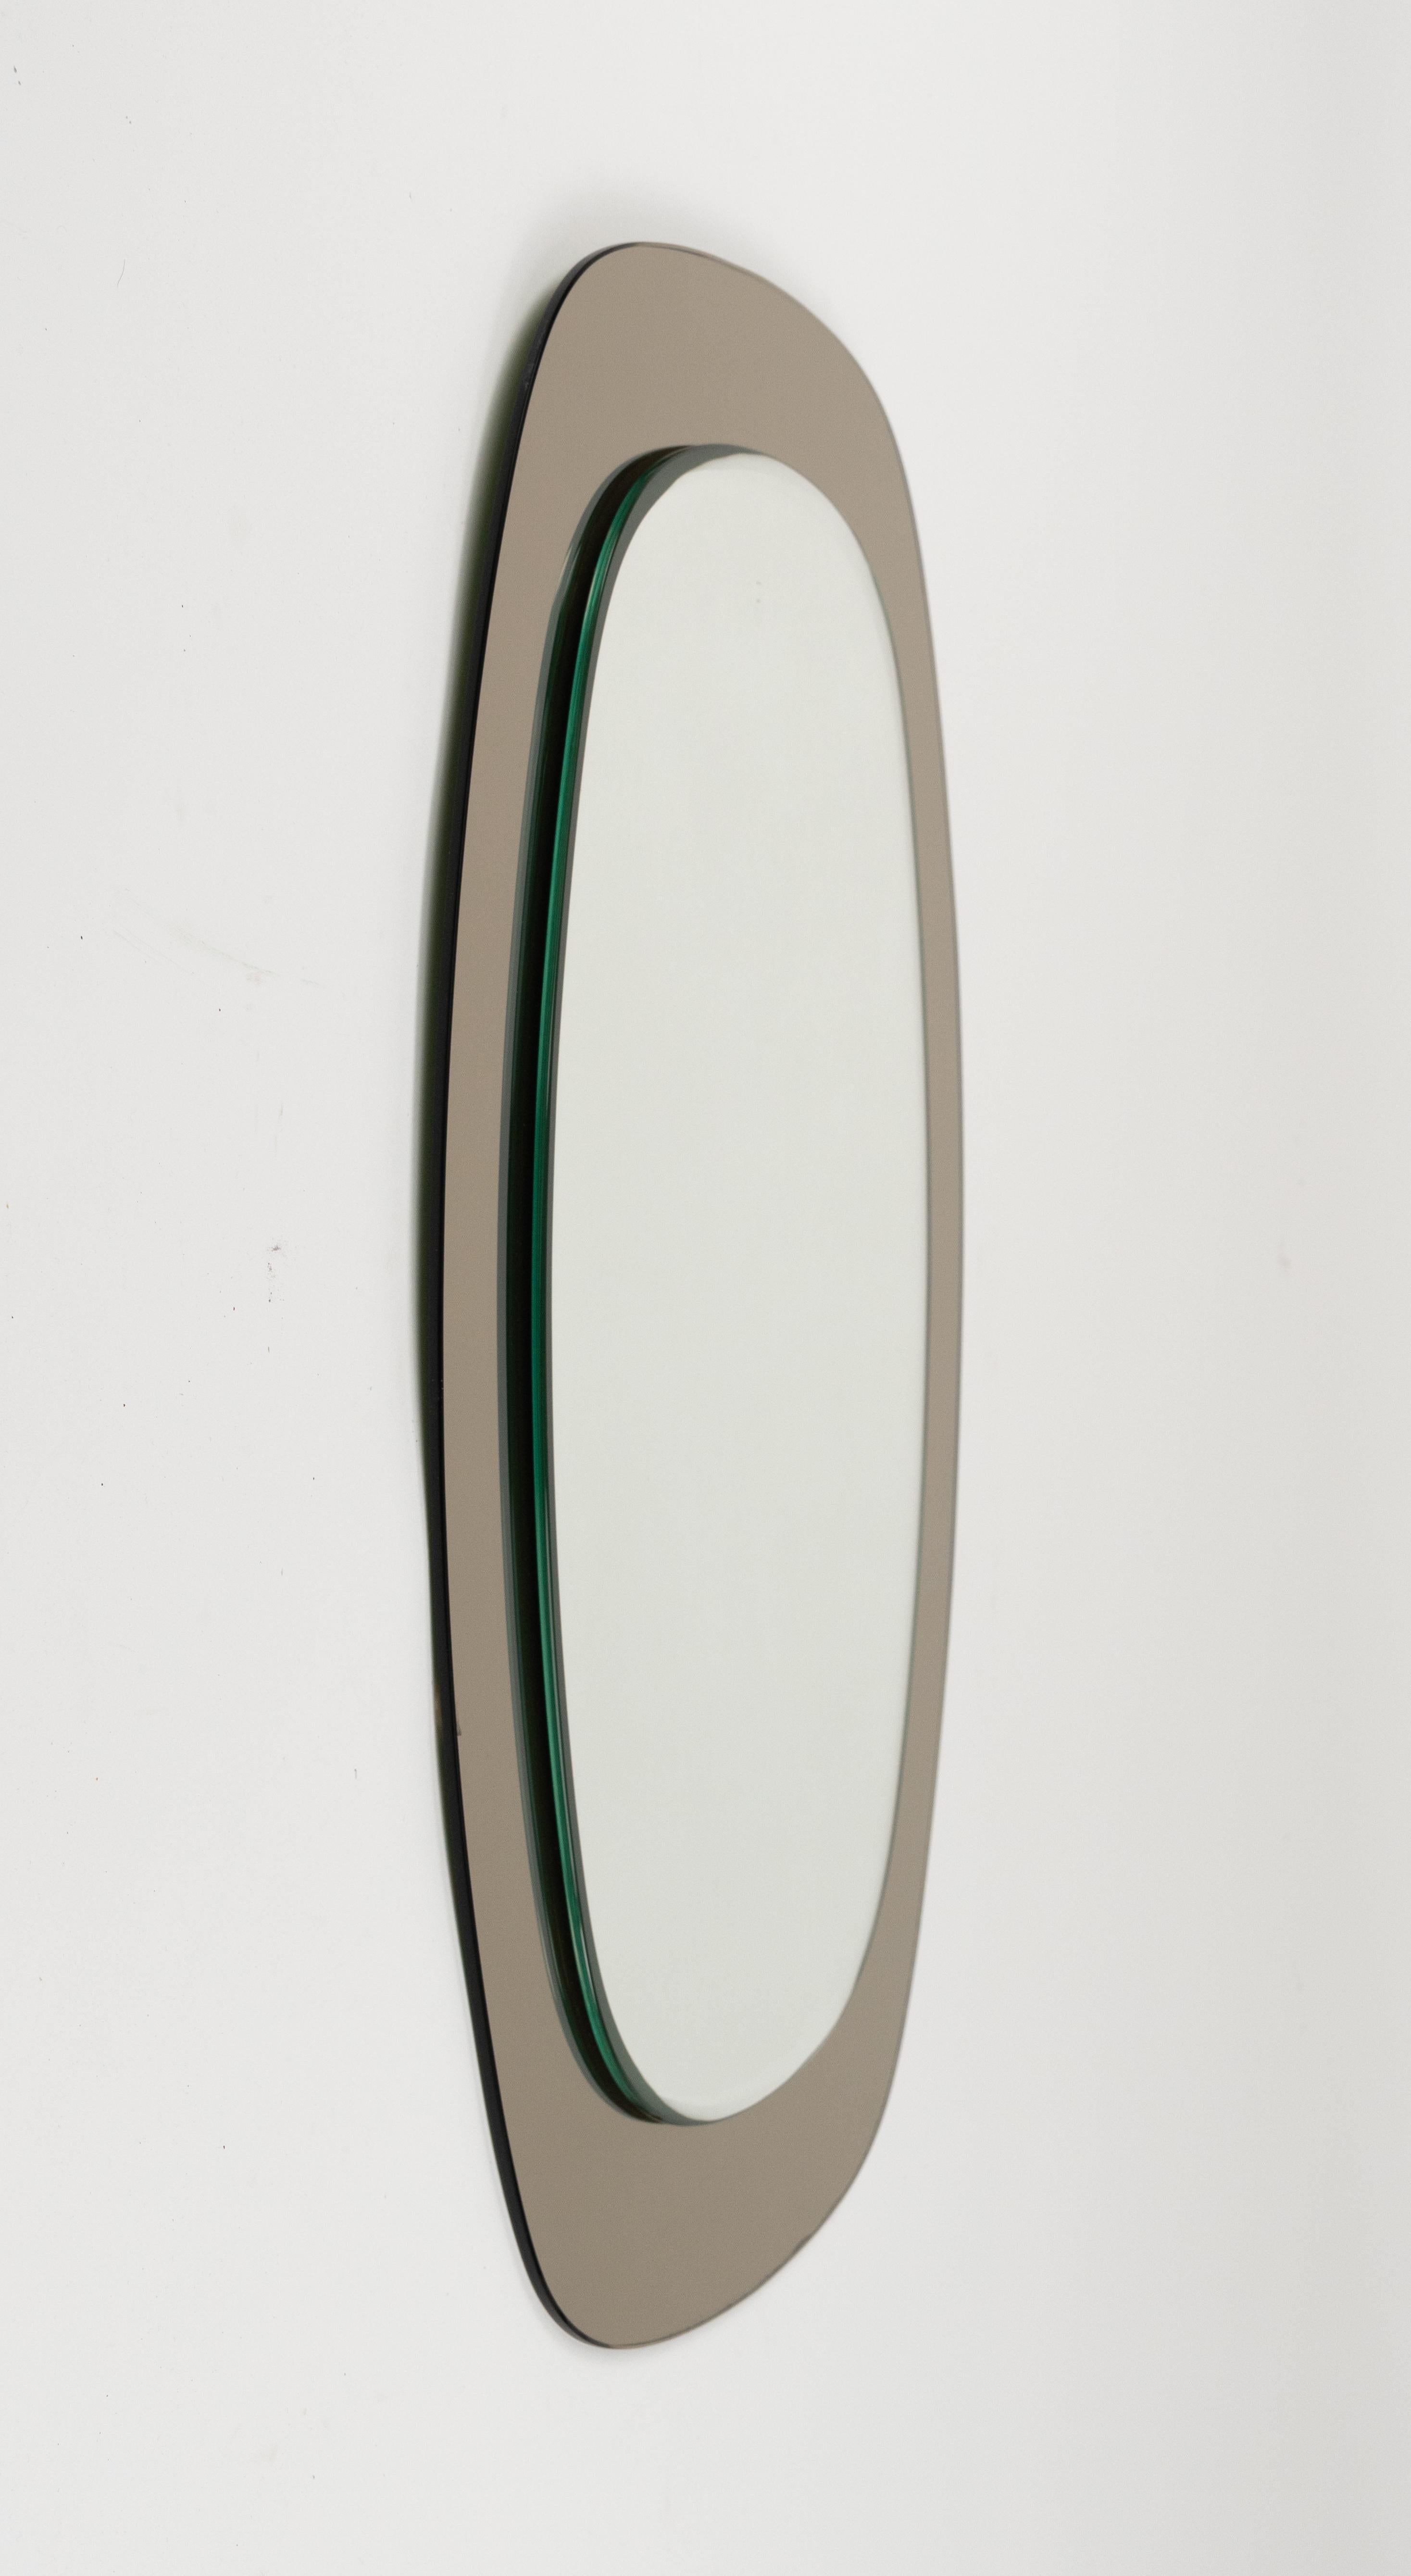 Italian Midcentury Cristal Art Oval Wall Mirror with Smoked Frame, Italy 1960s For Sale